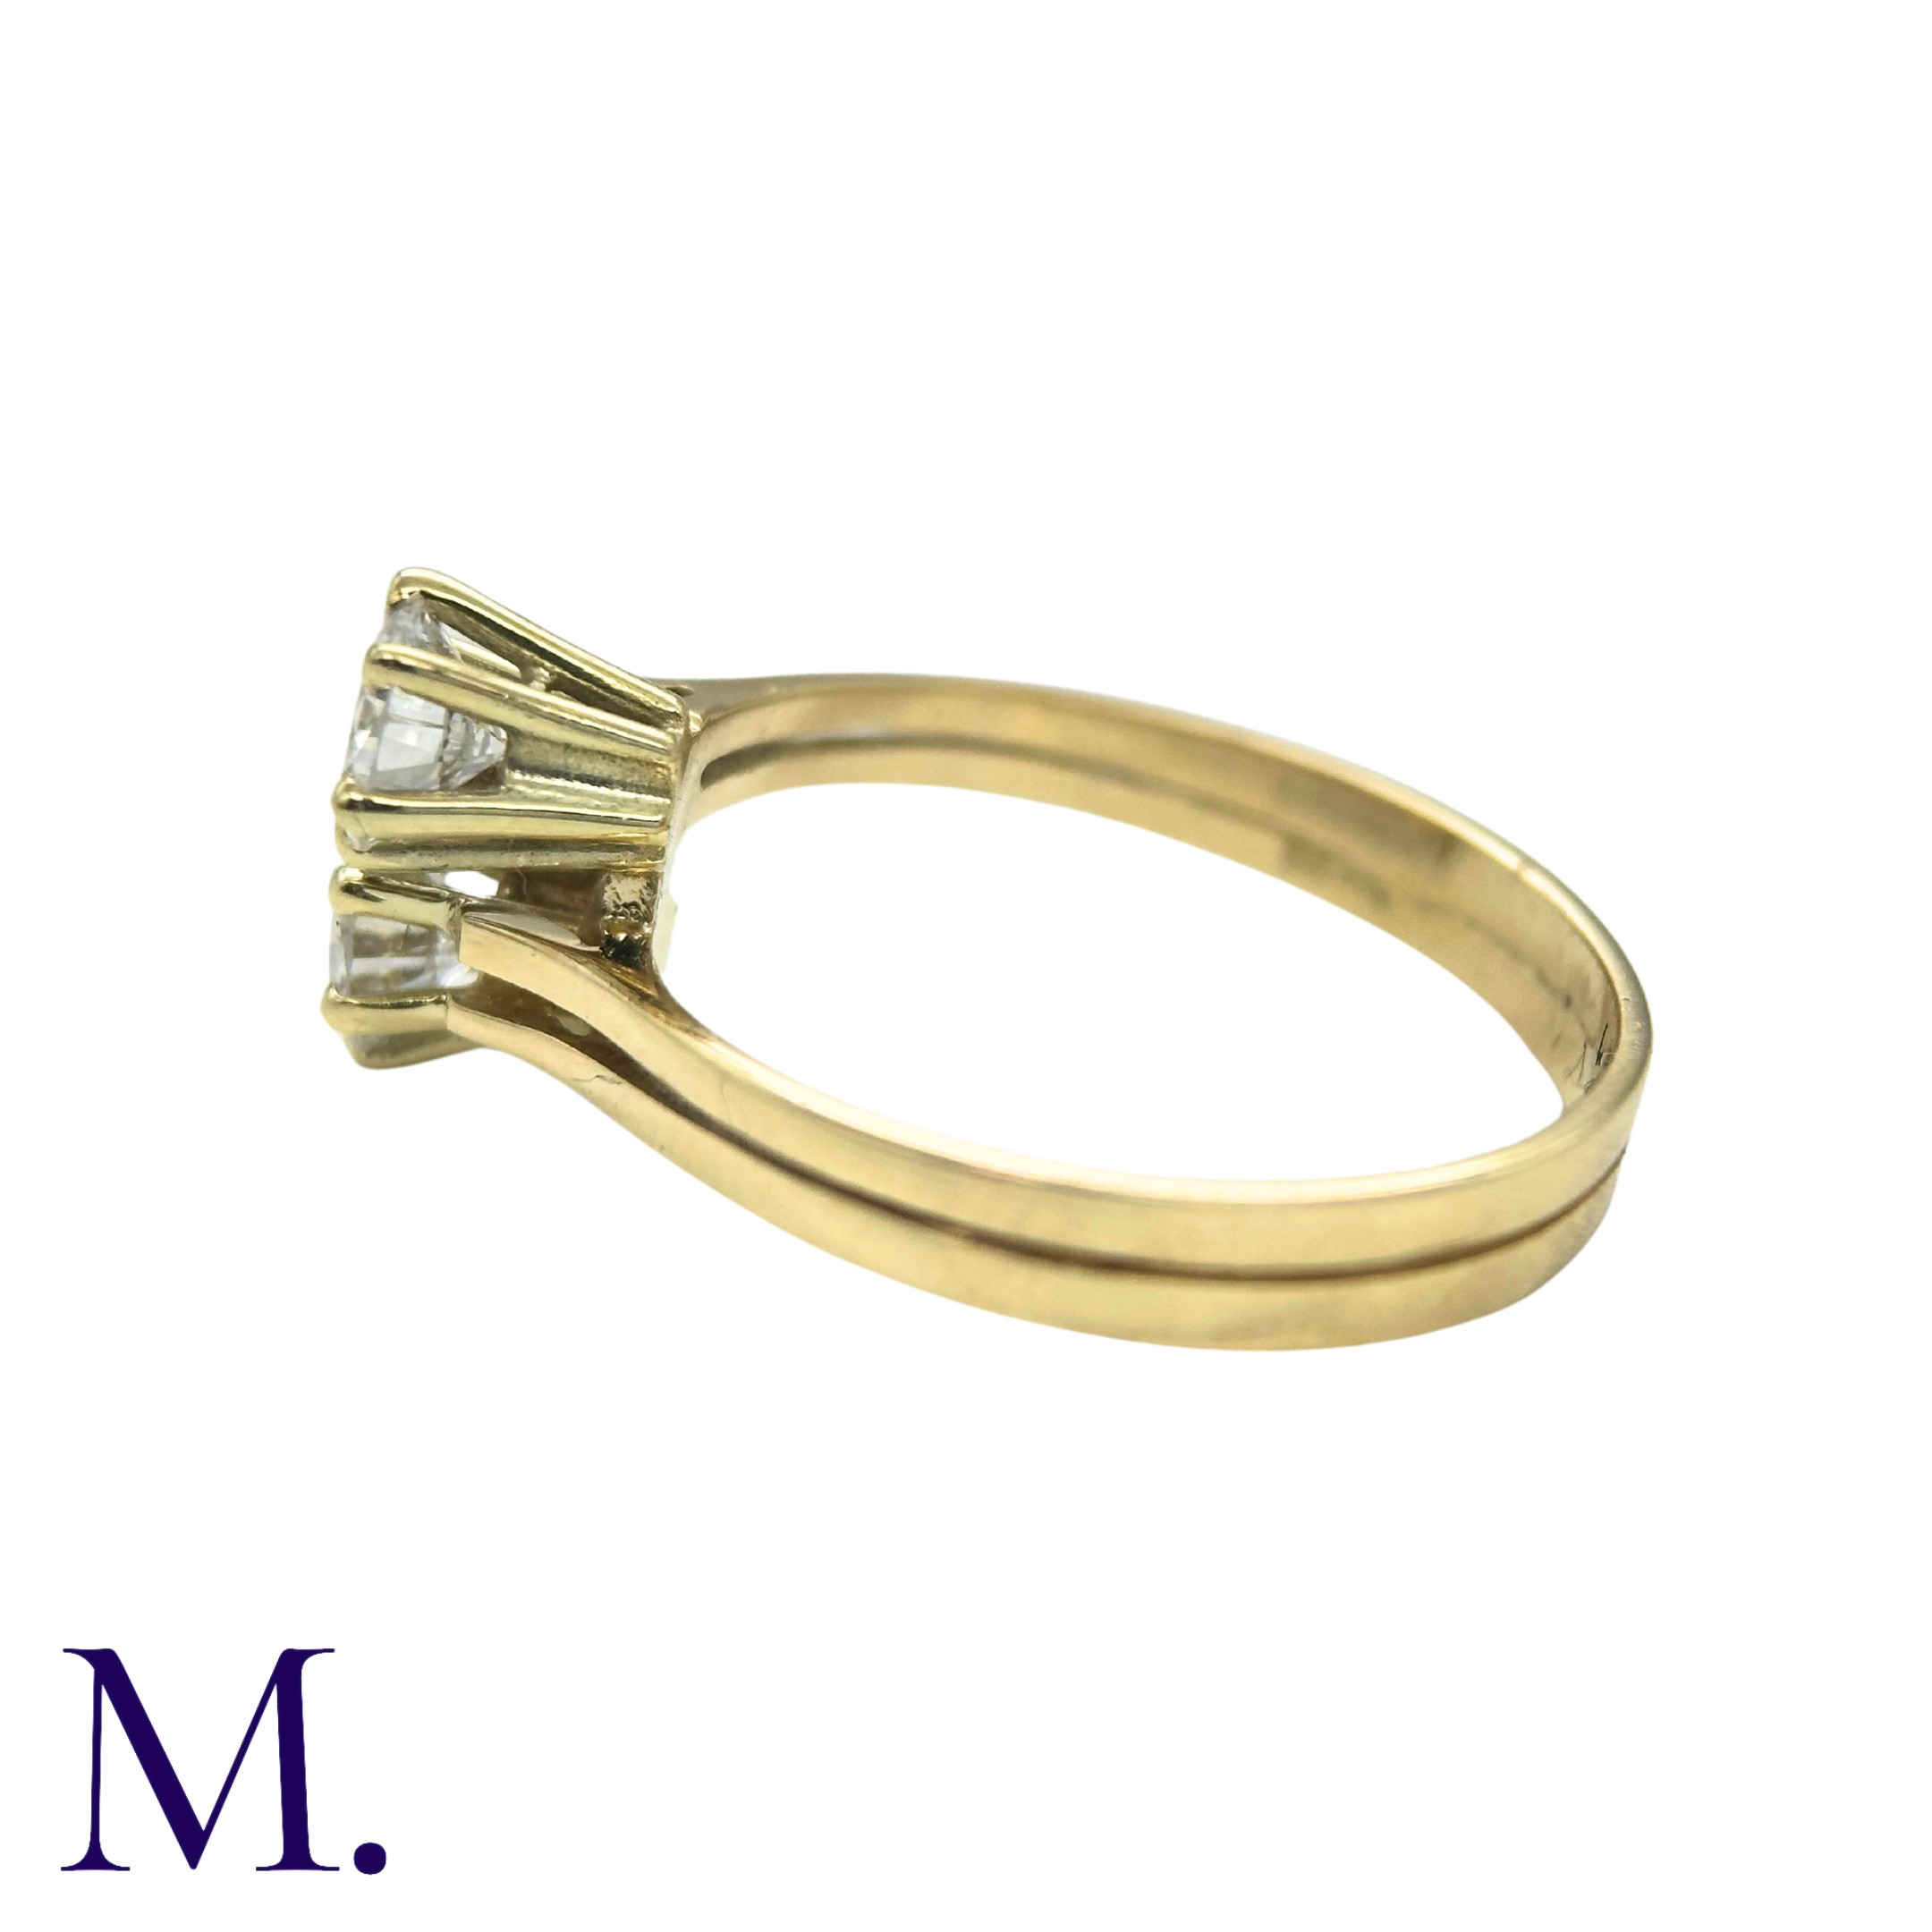 A Diamond 2-Stone Crossover Ring in 18K yellow gold, set with two round cut diamonds weighing - Image 4 of 4